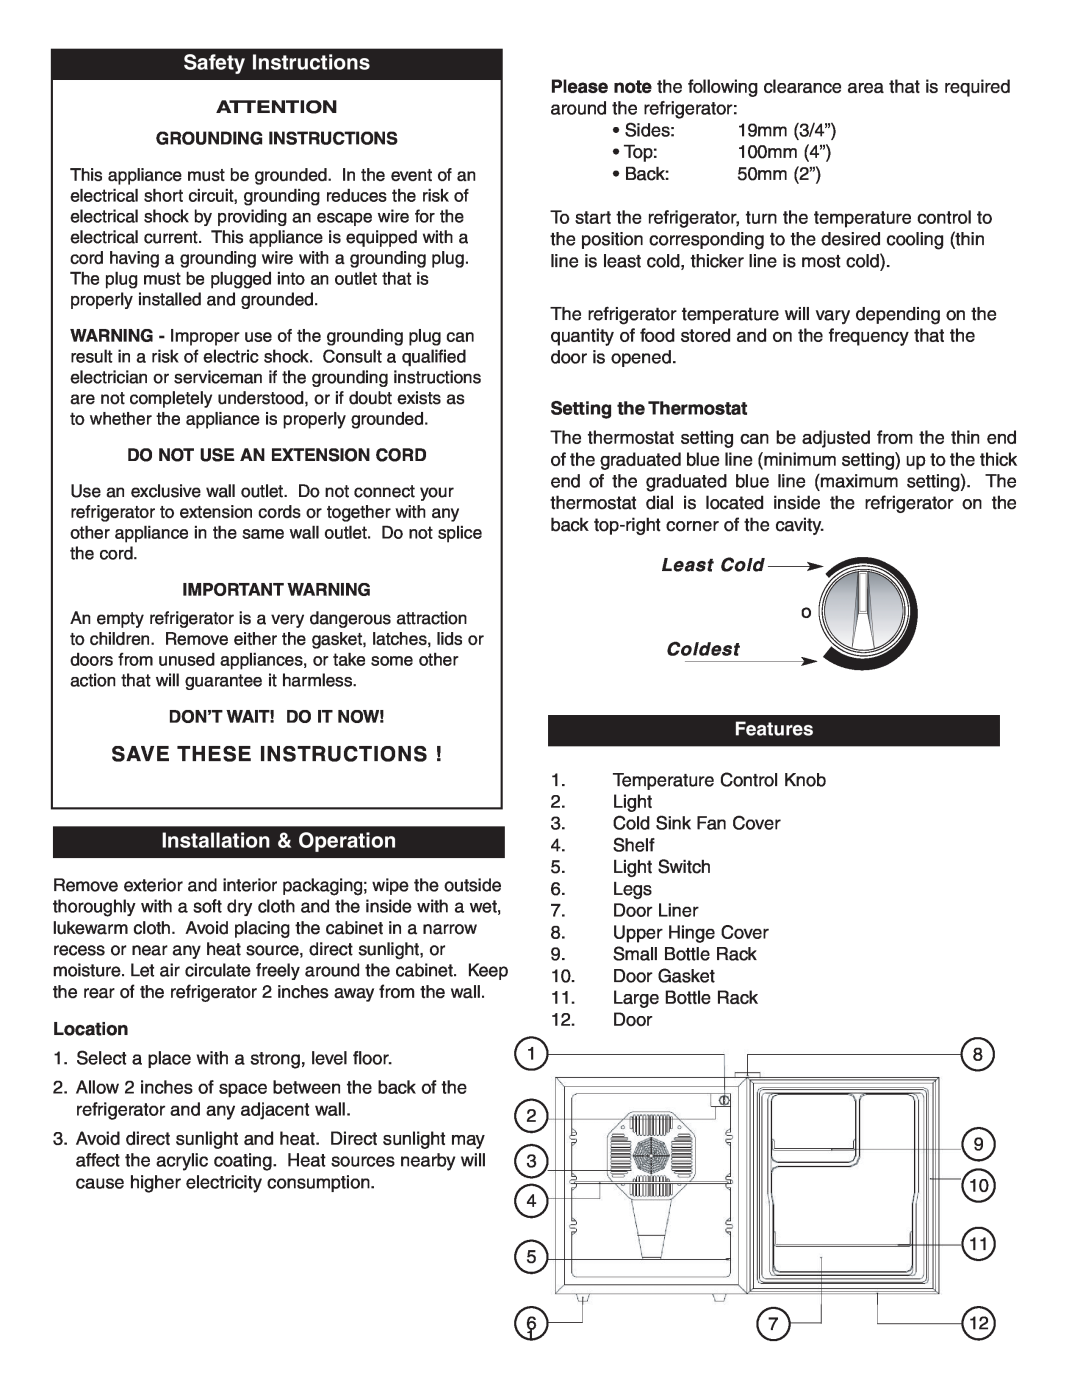 Danby DAR0488W Safety Instructions, Save These Instructions, Installation & Operation, Location, Setting the Thermostat 